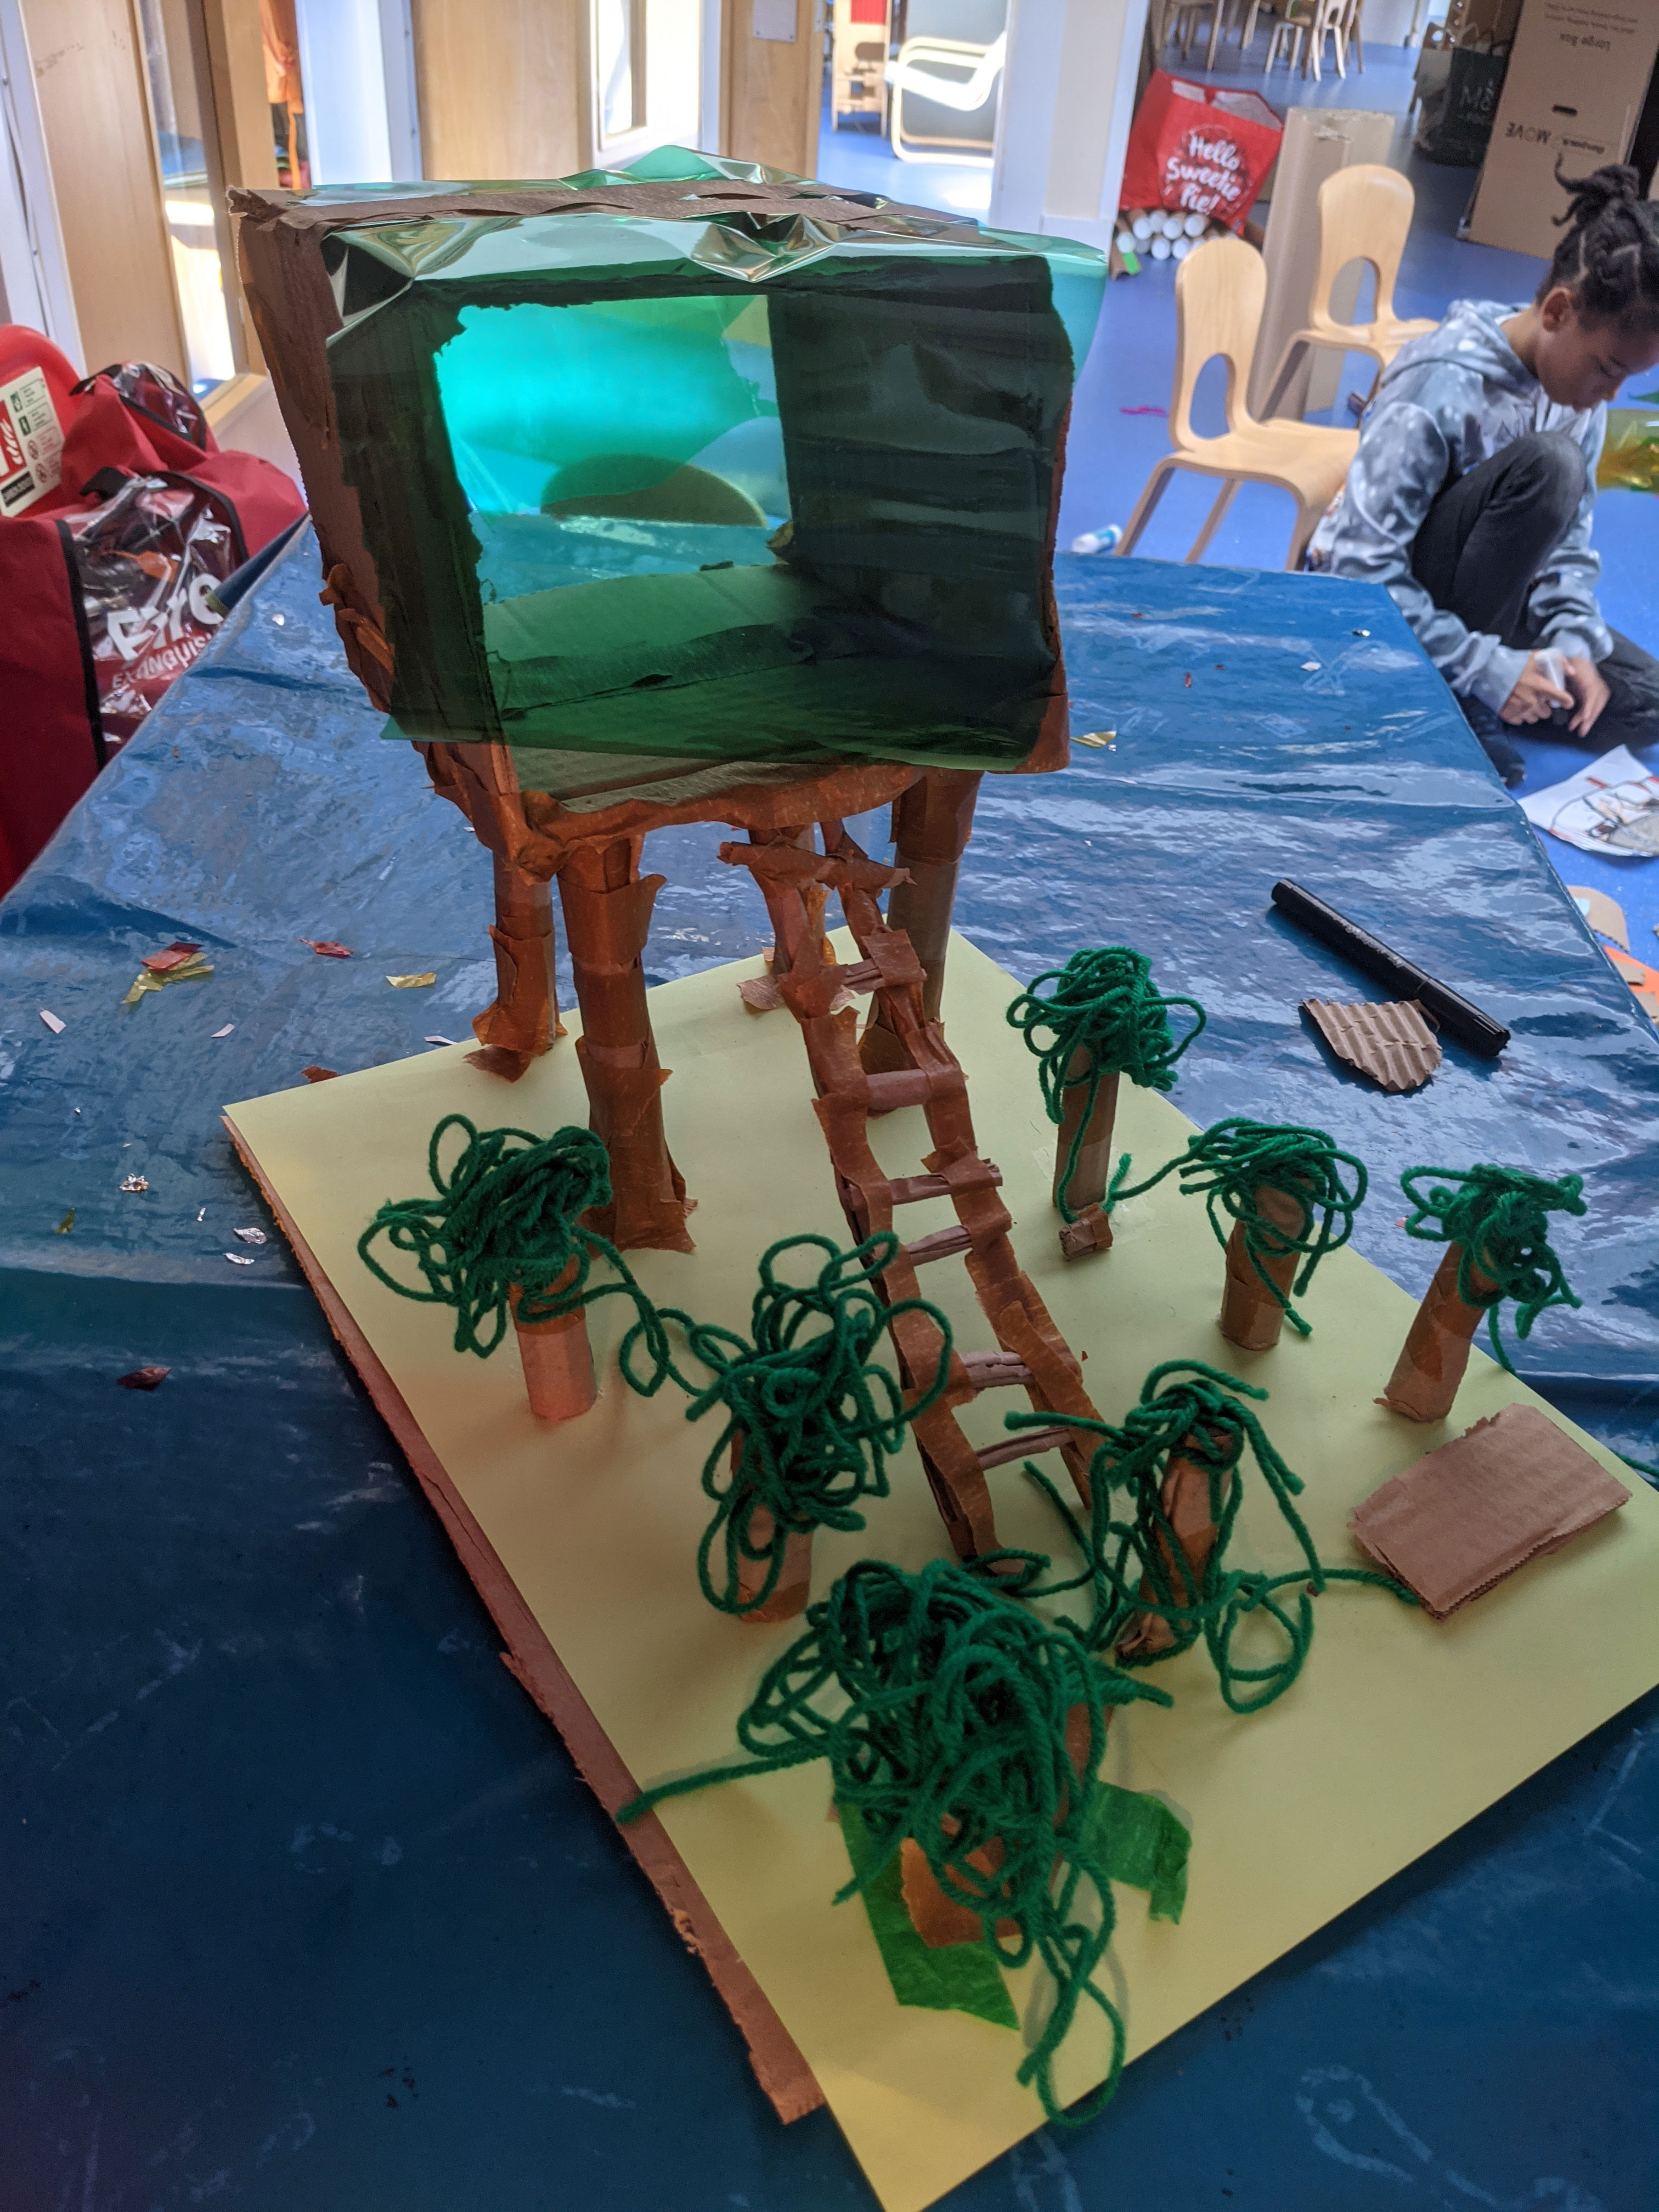 A small treehouse made with cardboard, tape, string and acetate placed on a sheet of A4 paper